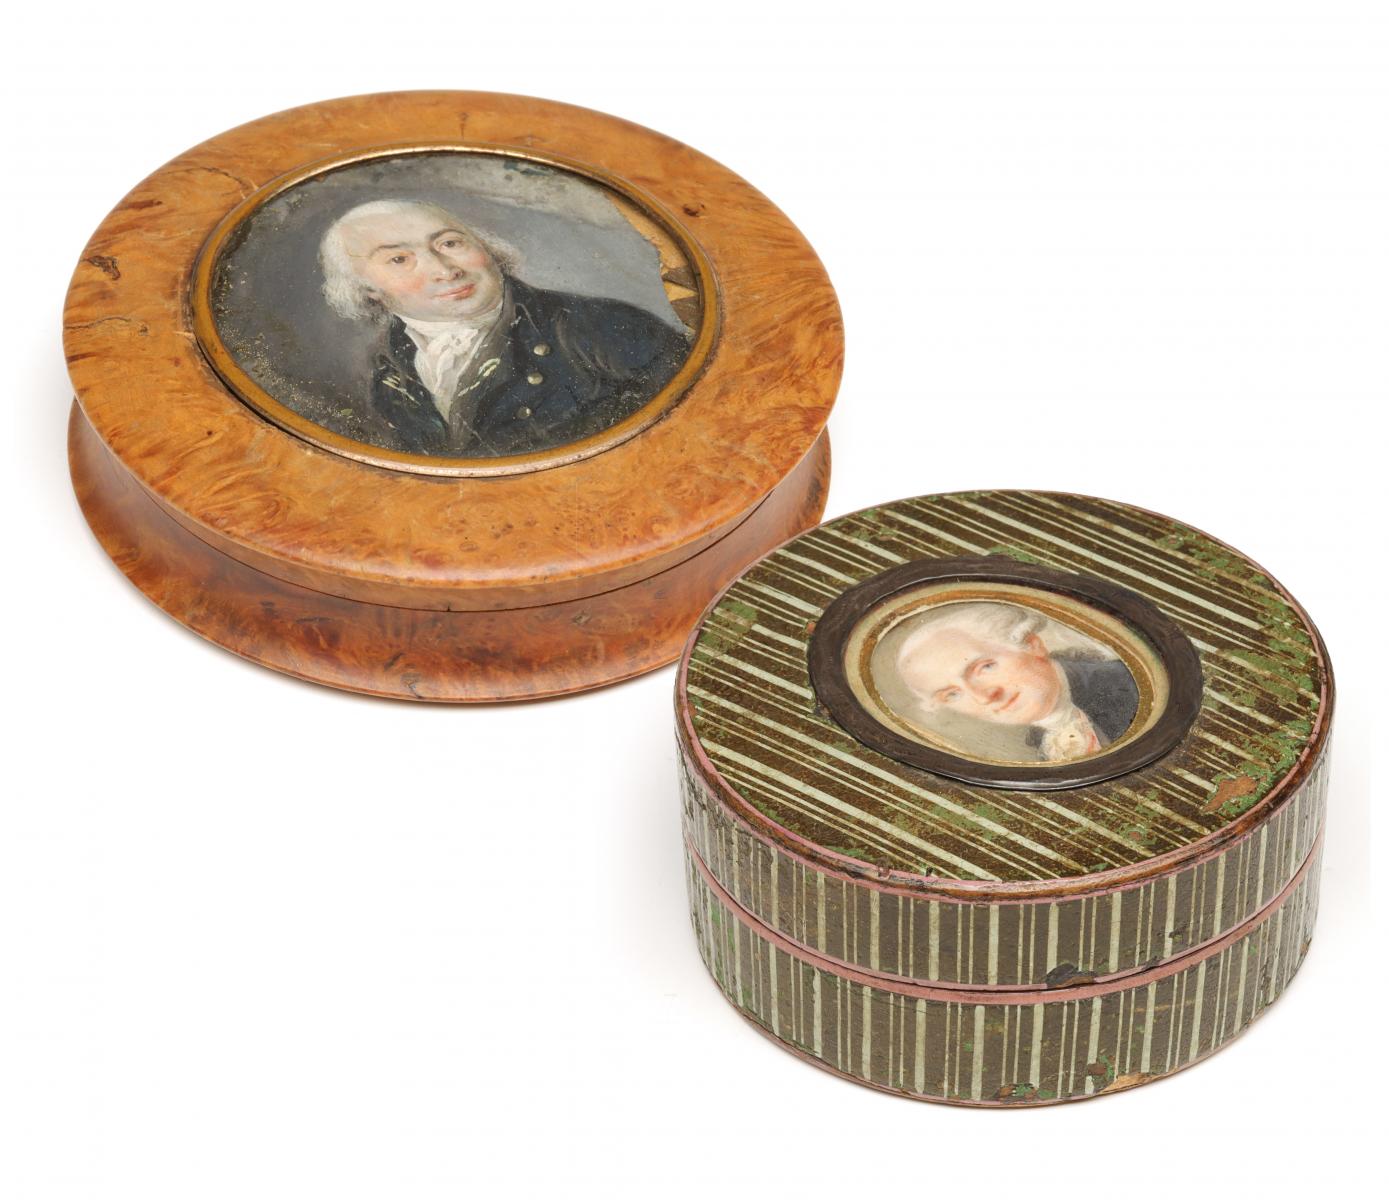 TWO 19TH C. SNUFF BOXES WITH MINIATURE PORTRAITS